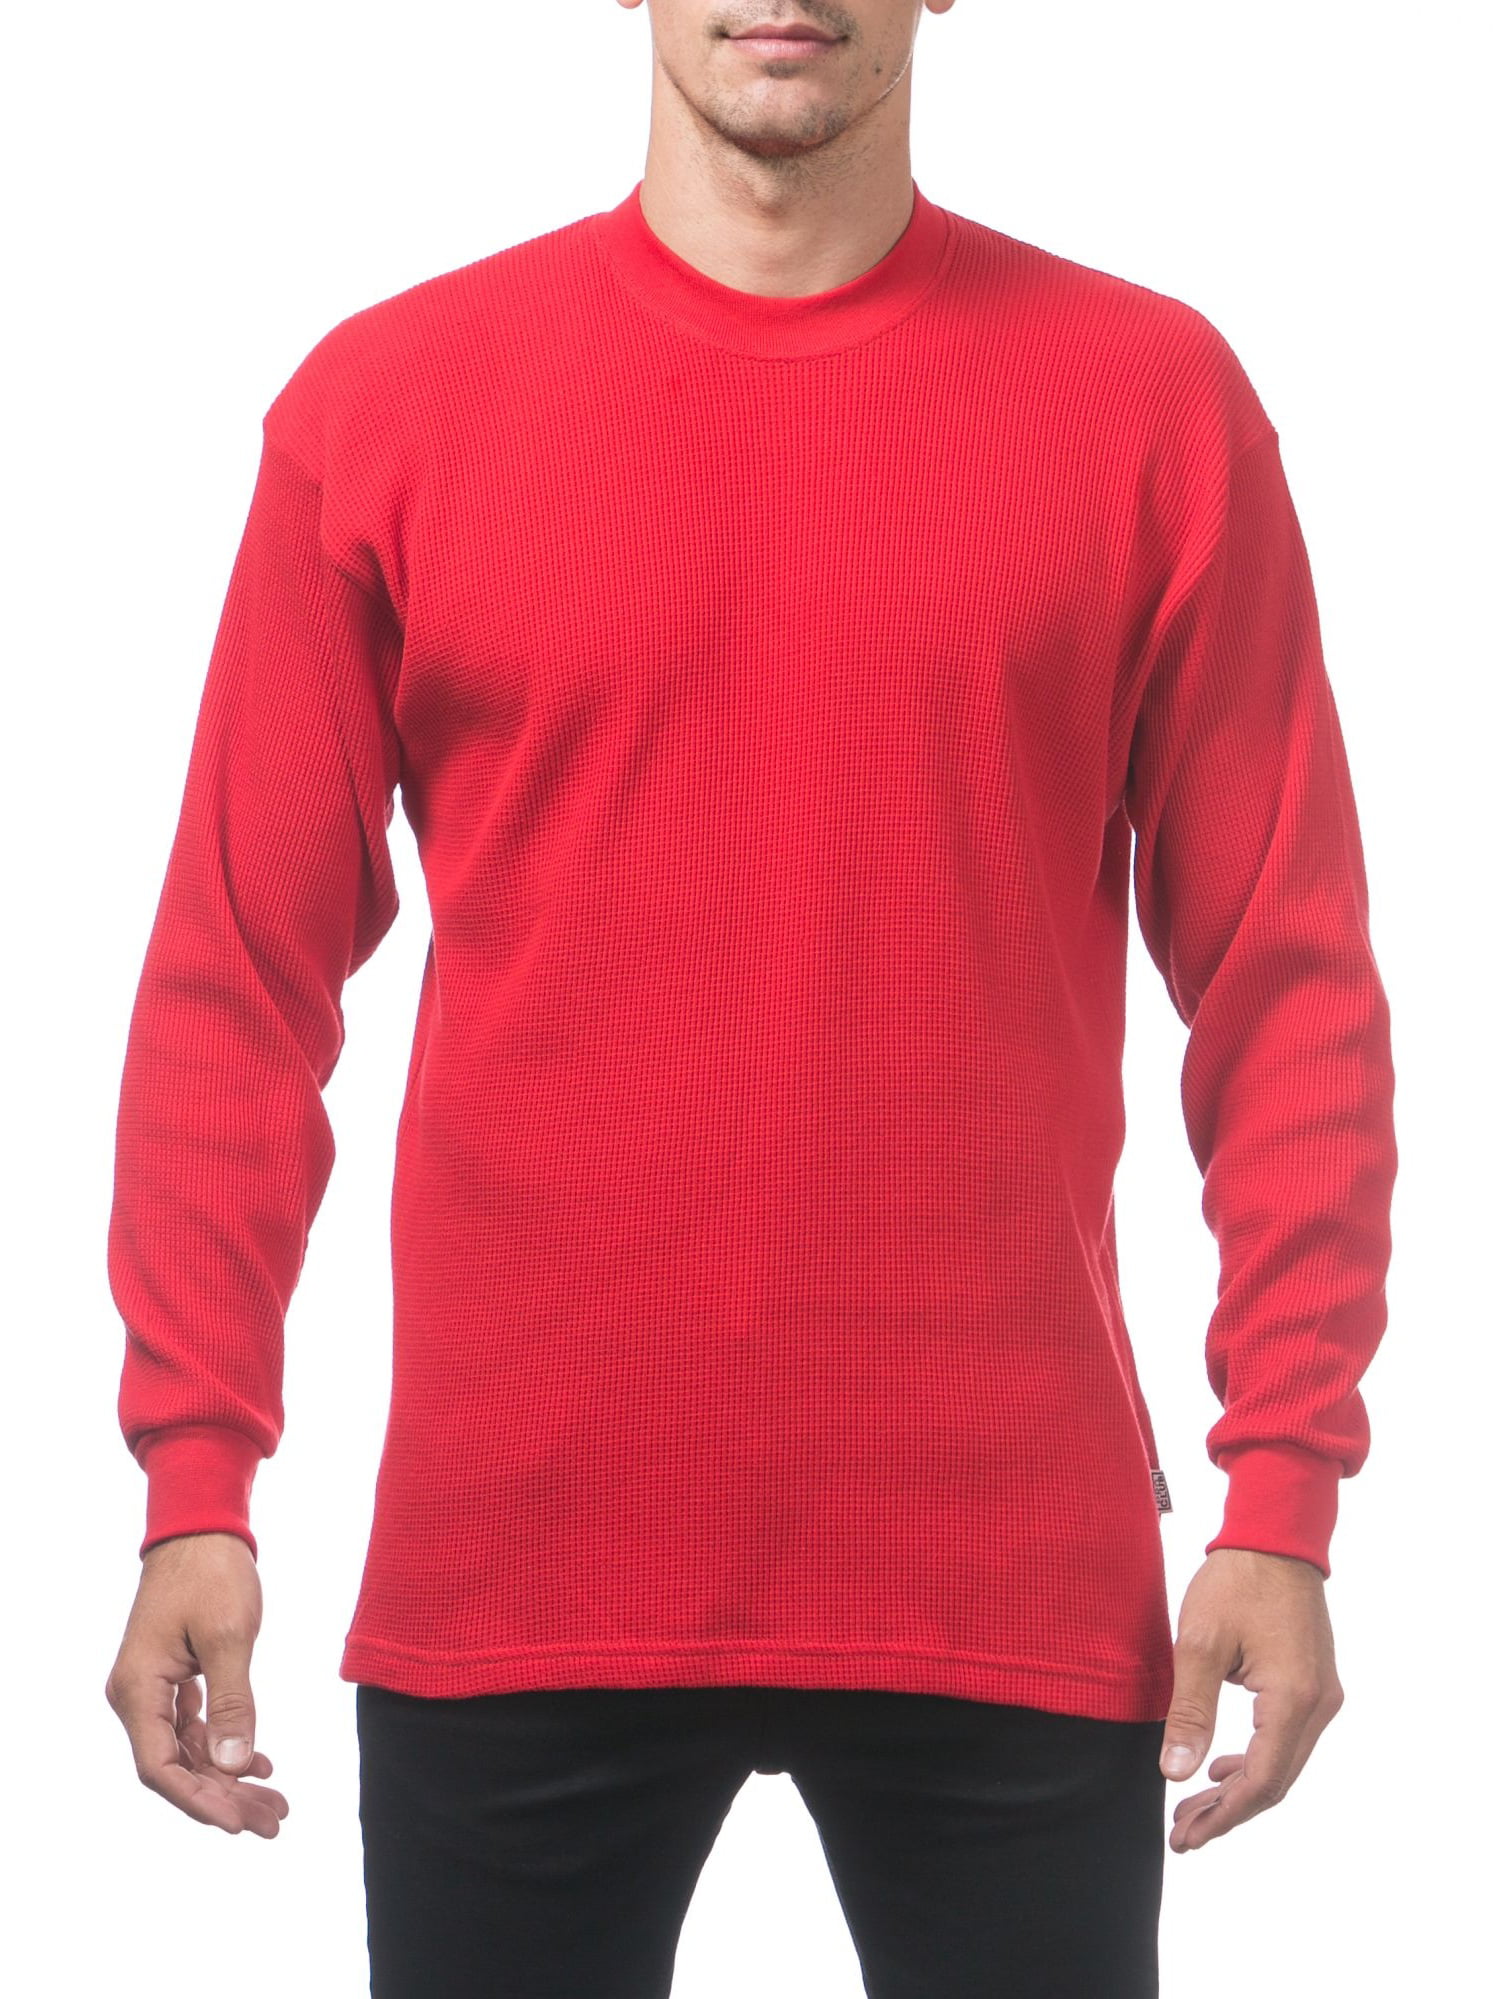 Pro Club Mens Heavyweight Cotton Long Sleeve Thermal Top